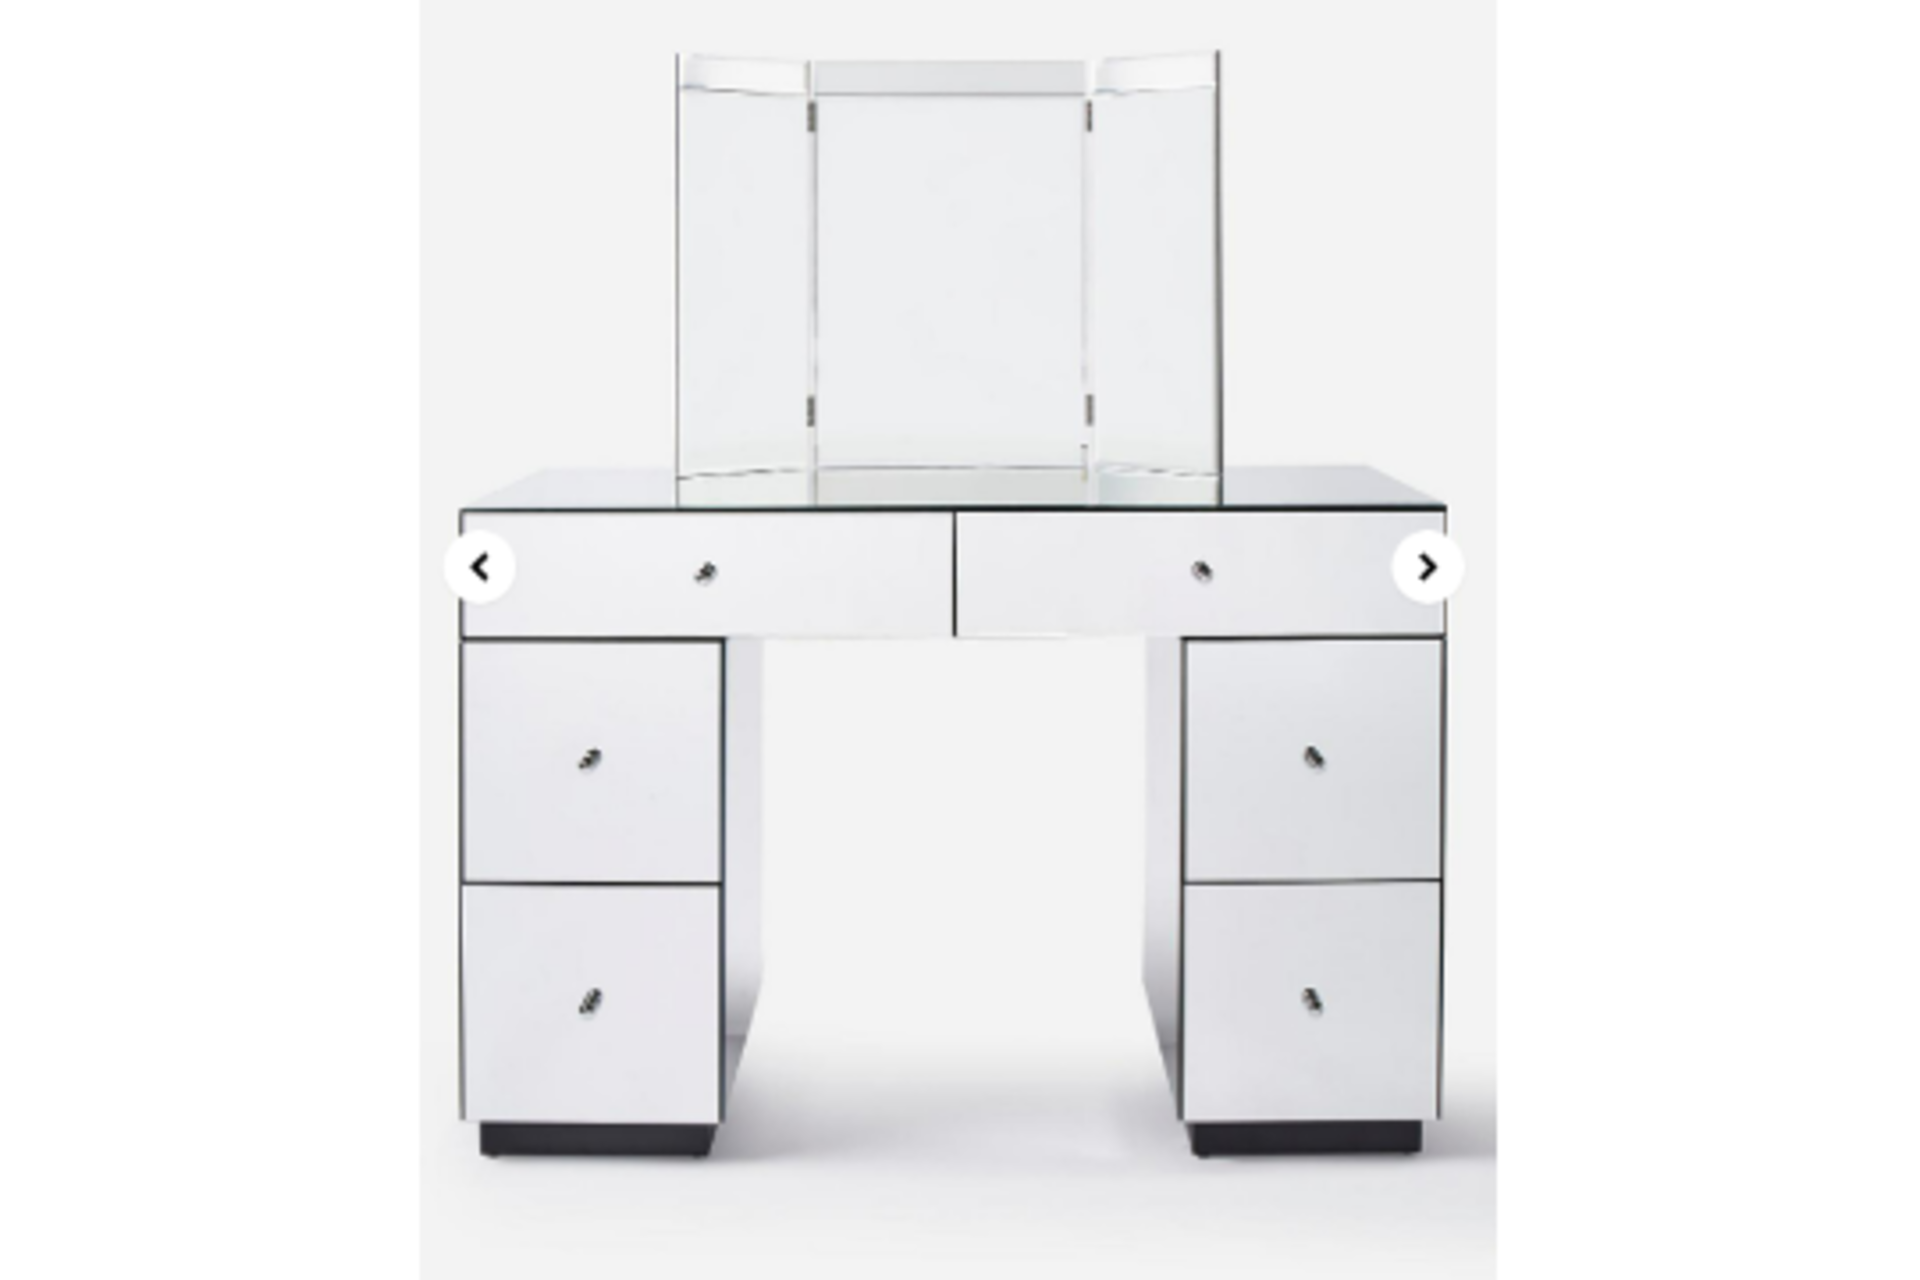 New & Boxed Luxury Deco Assembled Mirrored Dressing Table. RRP £599. The Mirage Mirrored Dressing - Image 4 of 4